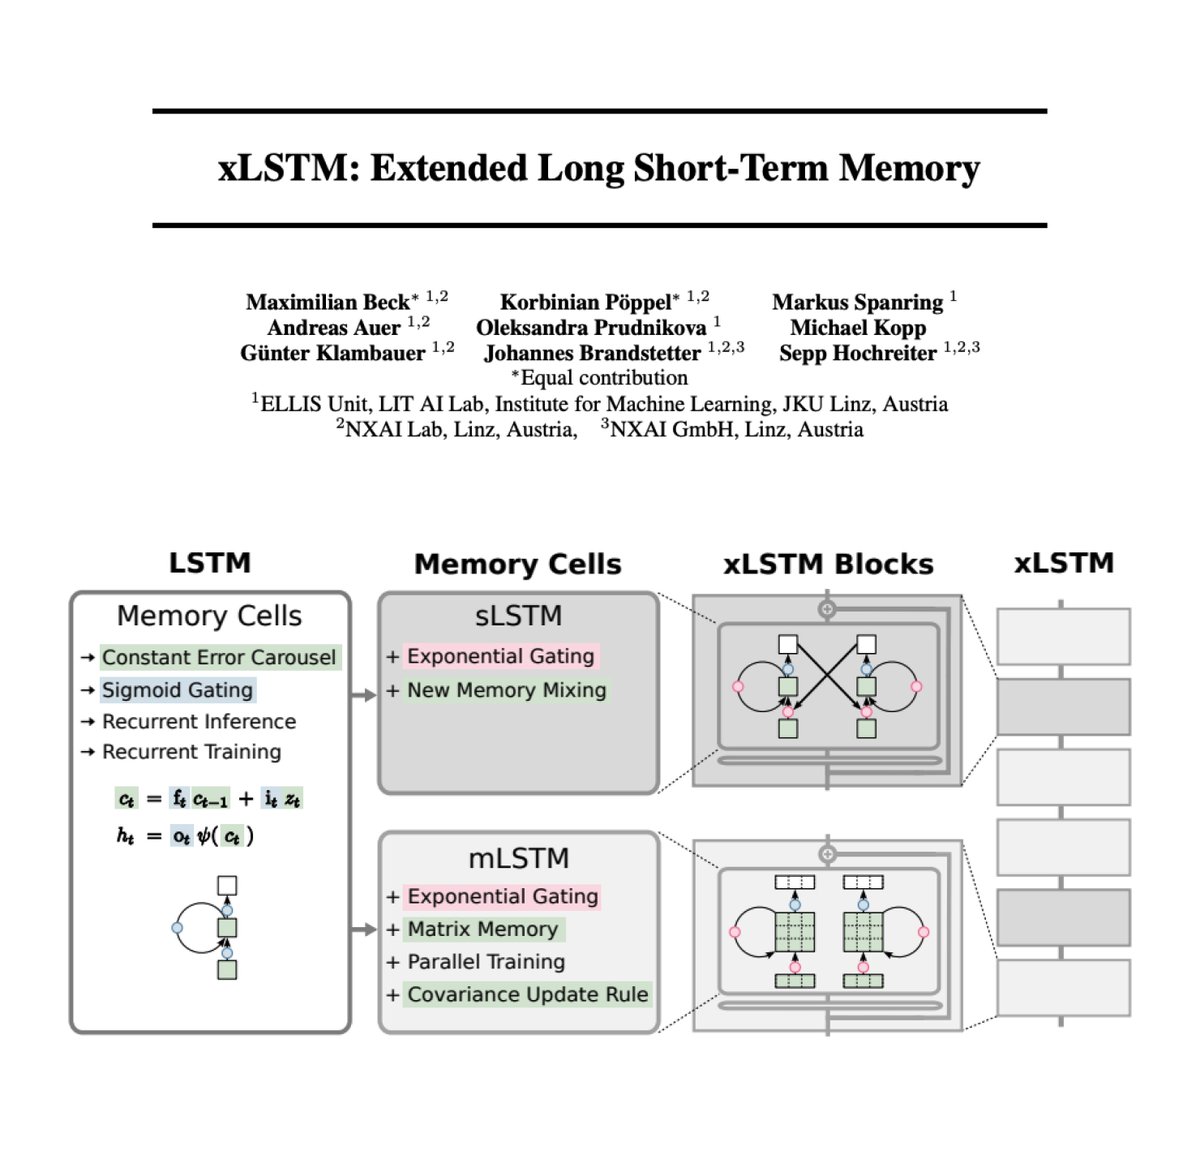 xLSTM: Extended Long Short-Term Memory

Attempts to scale LSTMs to billions of parameters using the latest techniques from modern LLMs and mitigating common limitations of LSTMs.

To enable LSTMs the ability to revise storage decisions, they introduce exponential gating and a new…